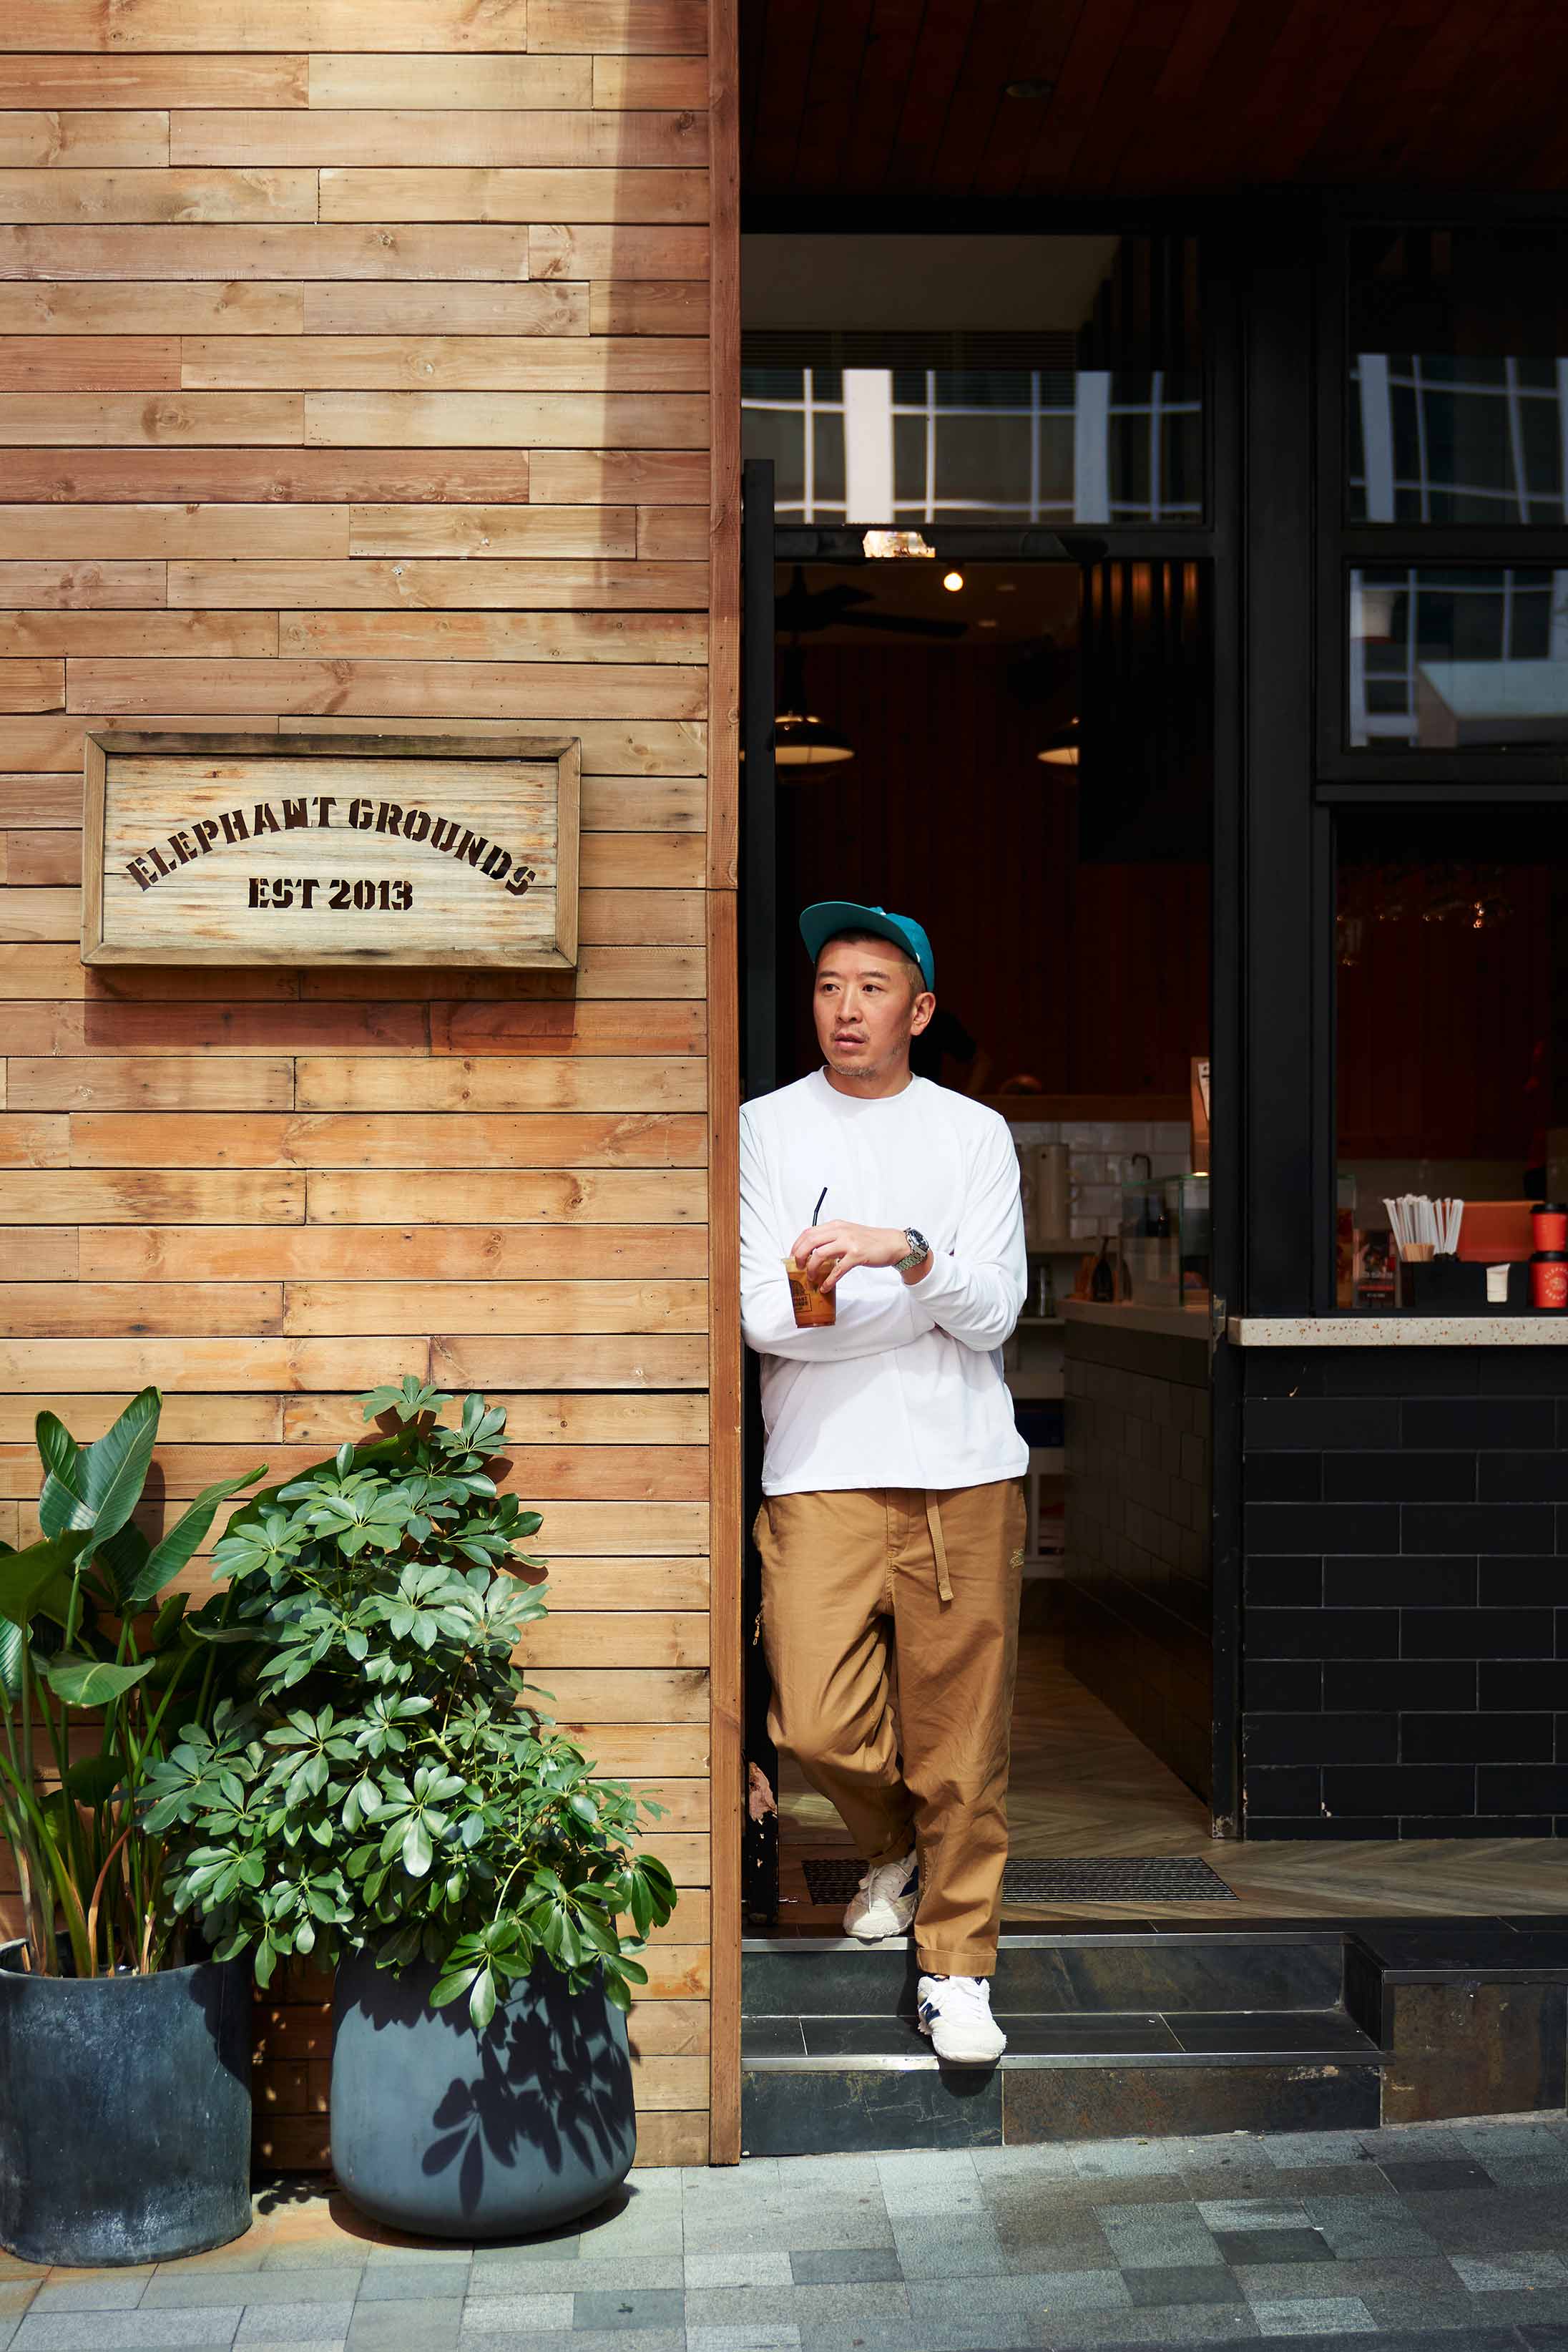 Restaurant entrepreneur Gerald Li is one of the founders of Elephant Grounds through his brand Leading Nation